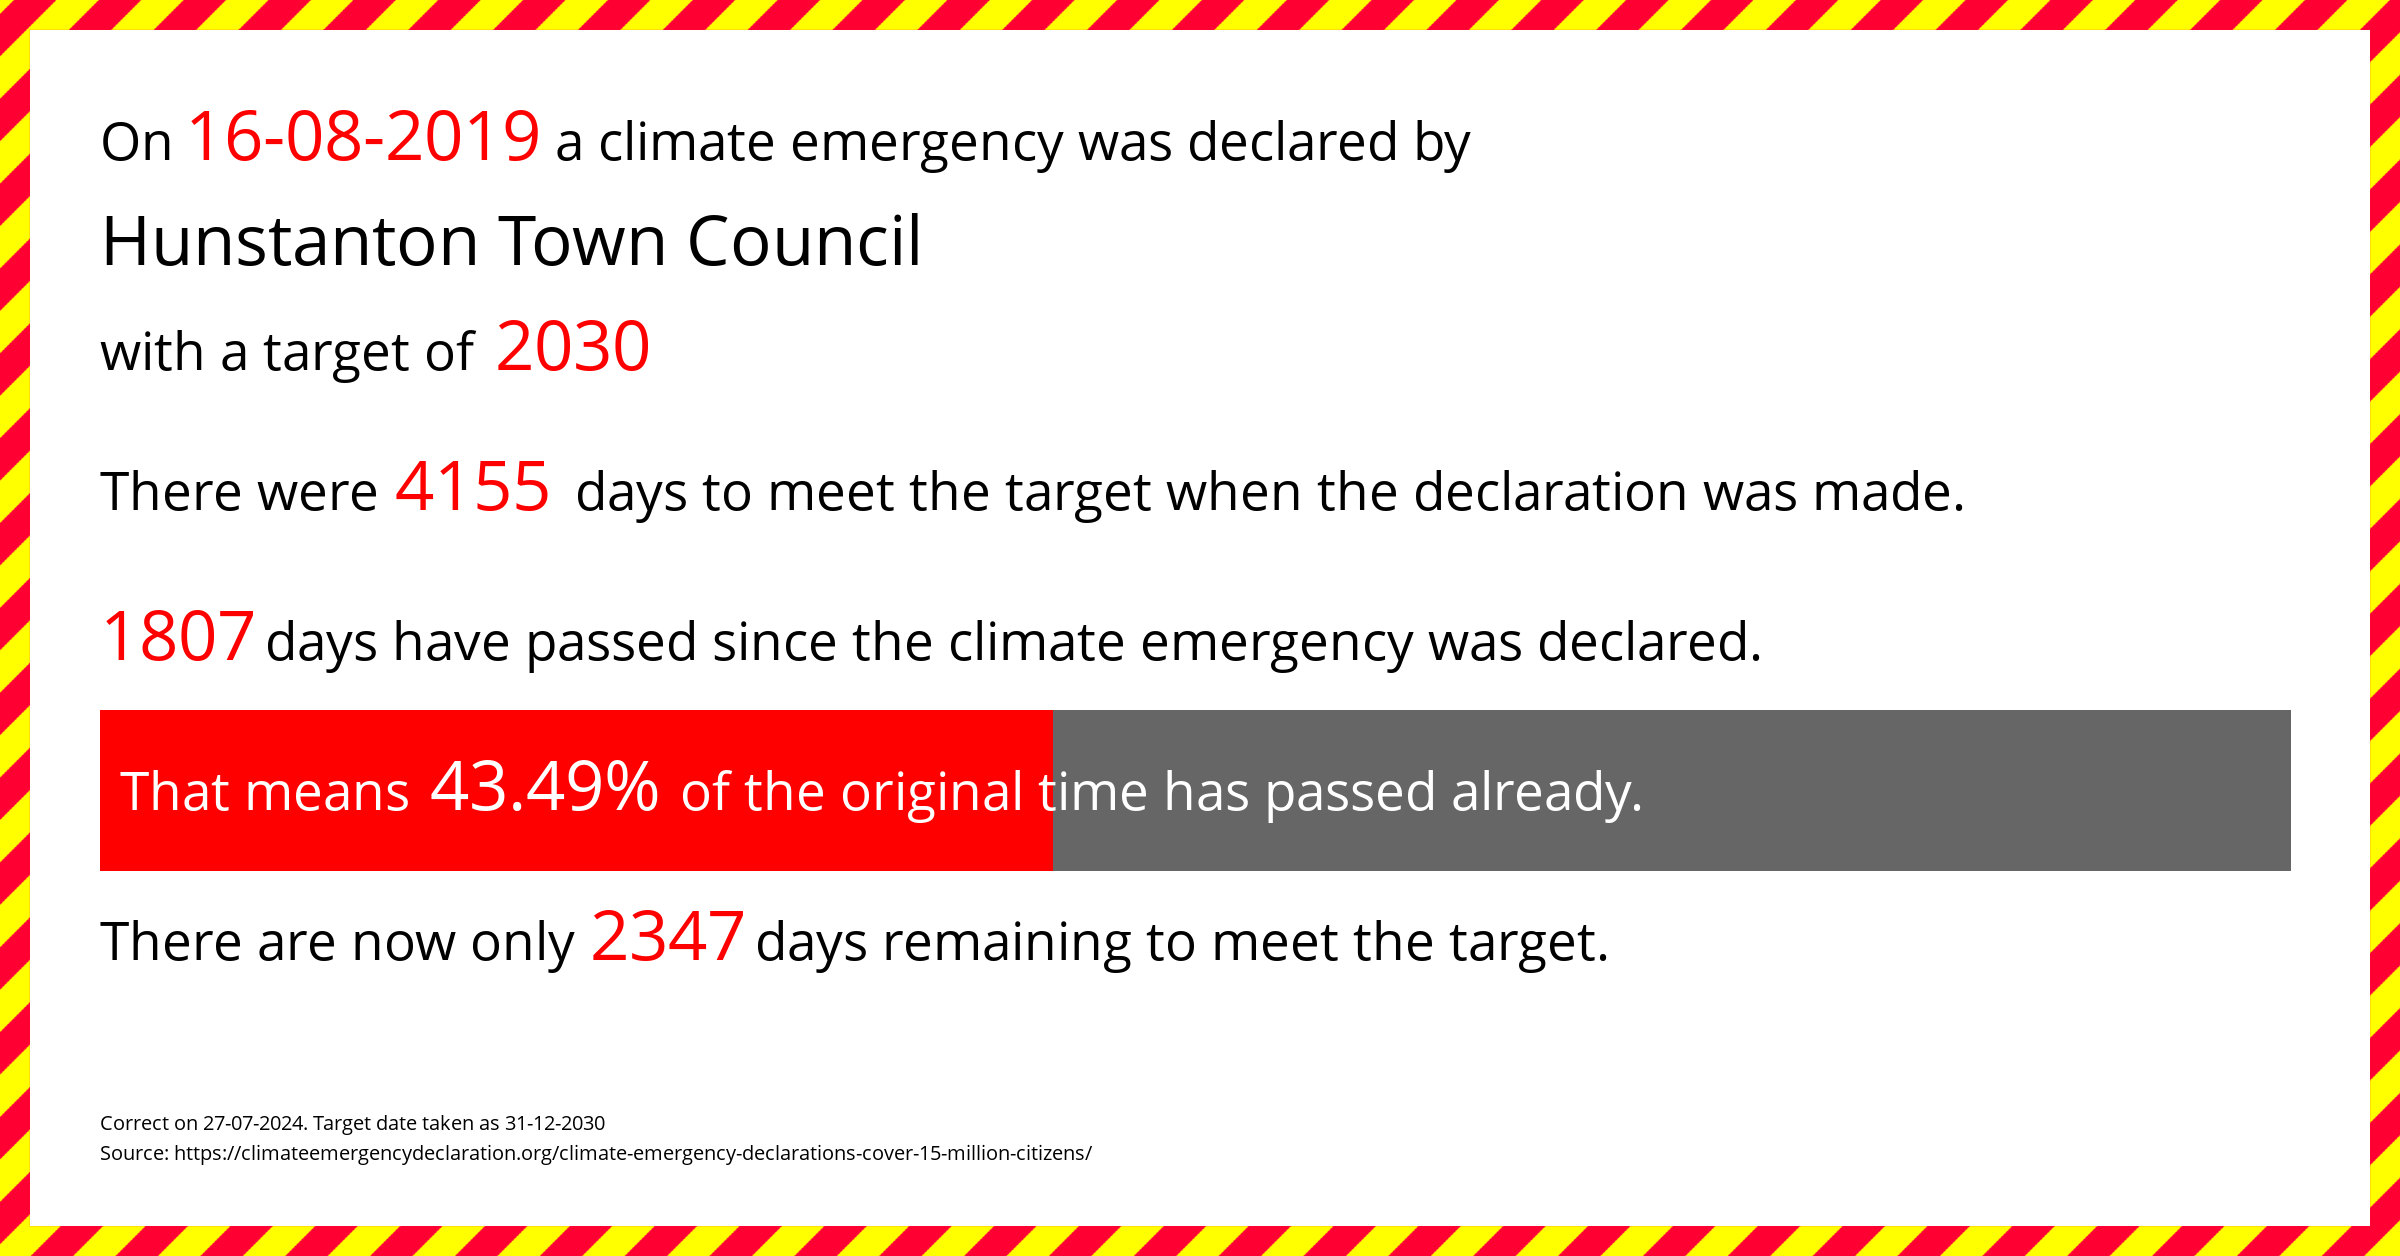 Hunstanton Town Council declared a Climate emergency on Friday 16th August 2019, with a target of 2030.